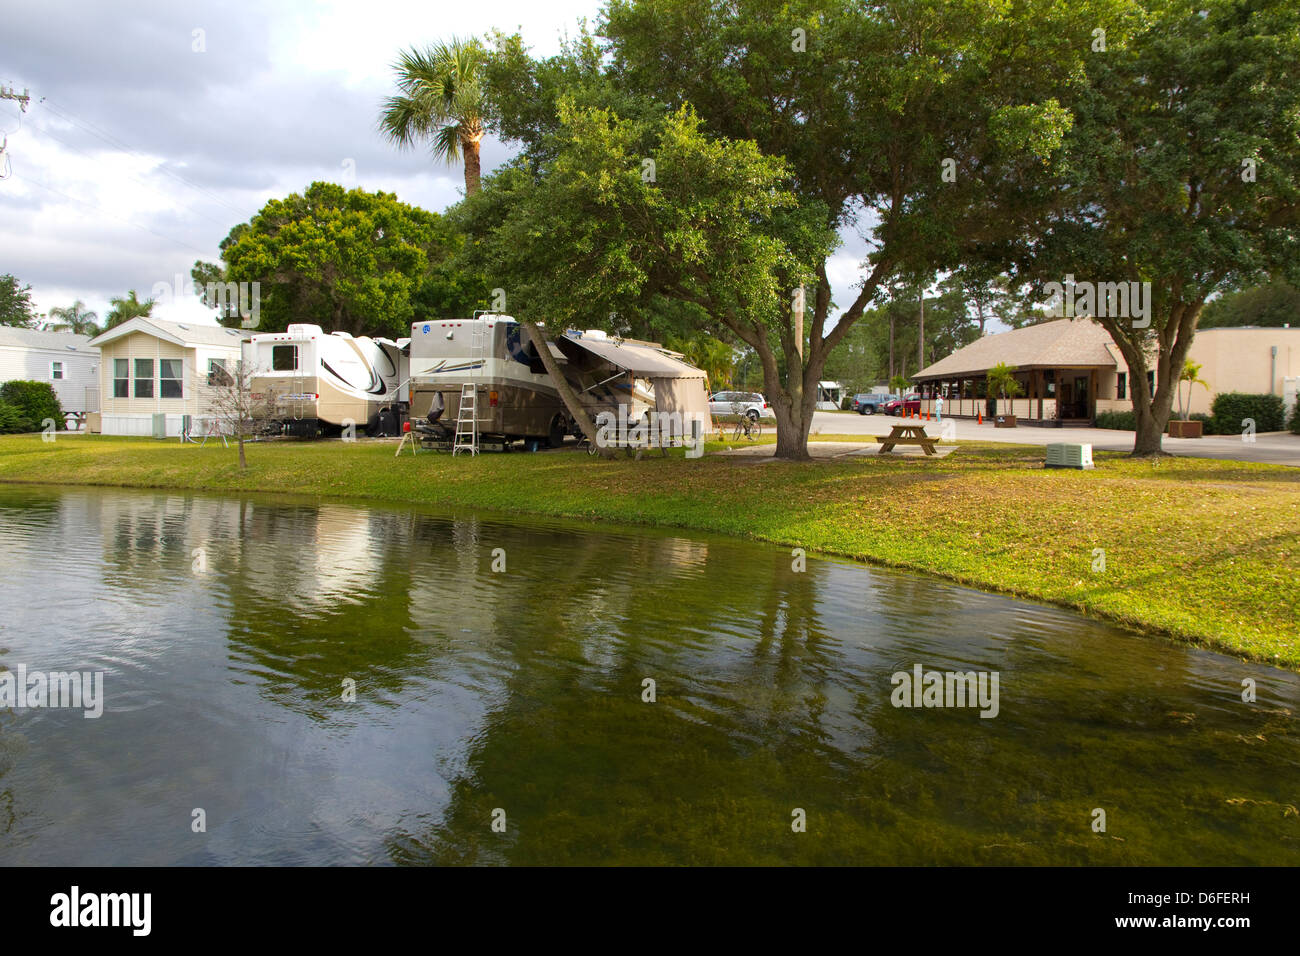 Road Runner Travel Resort is one of south Florida's finest RV campgrounds, Ft. Pierce, FL Stock Photo